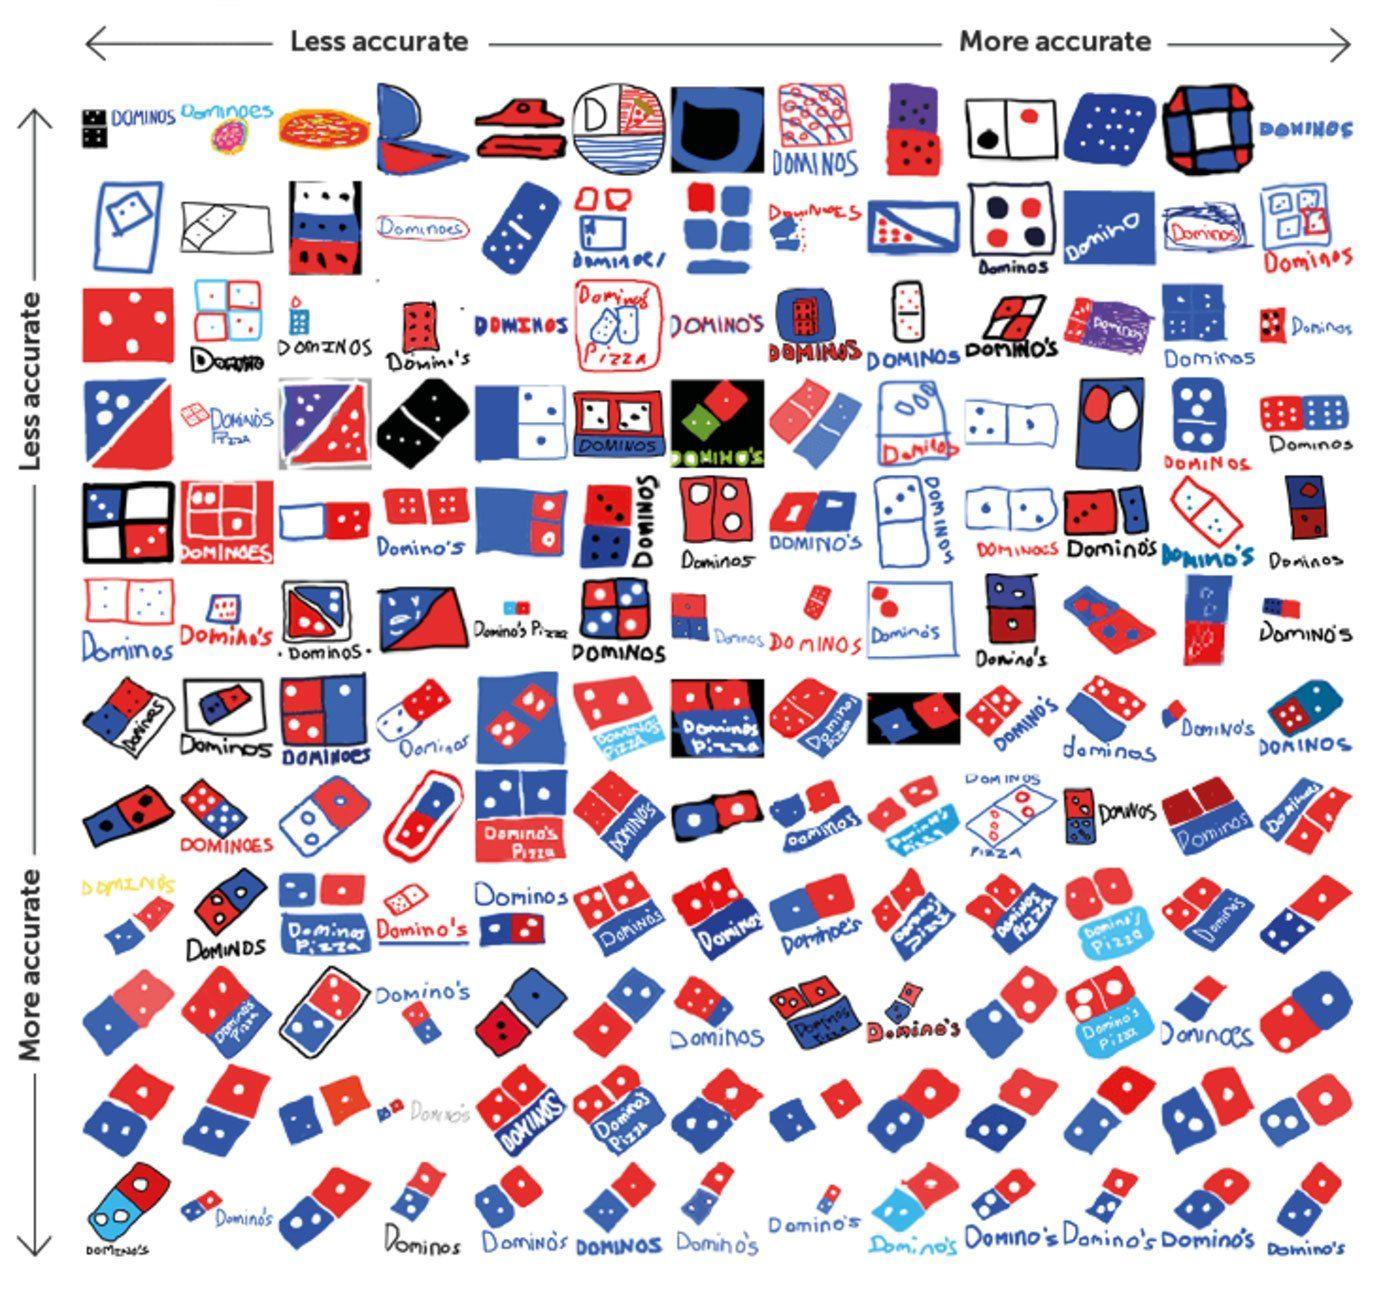 Domino's Logo - dominos-logo-from-memory - RedWell & Co